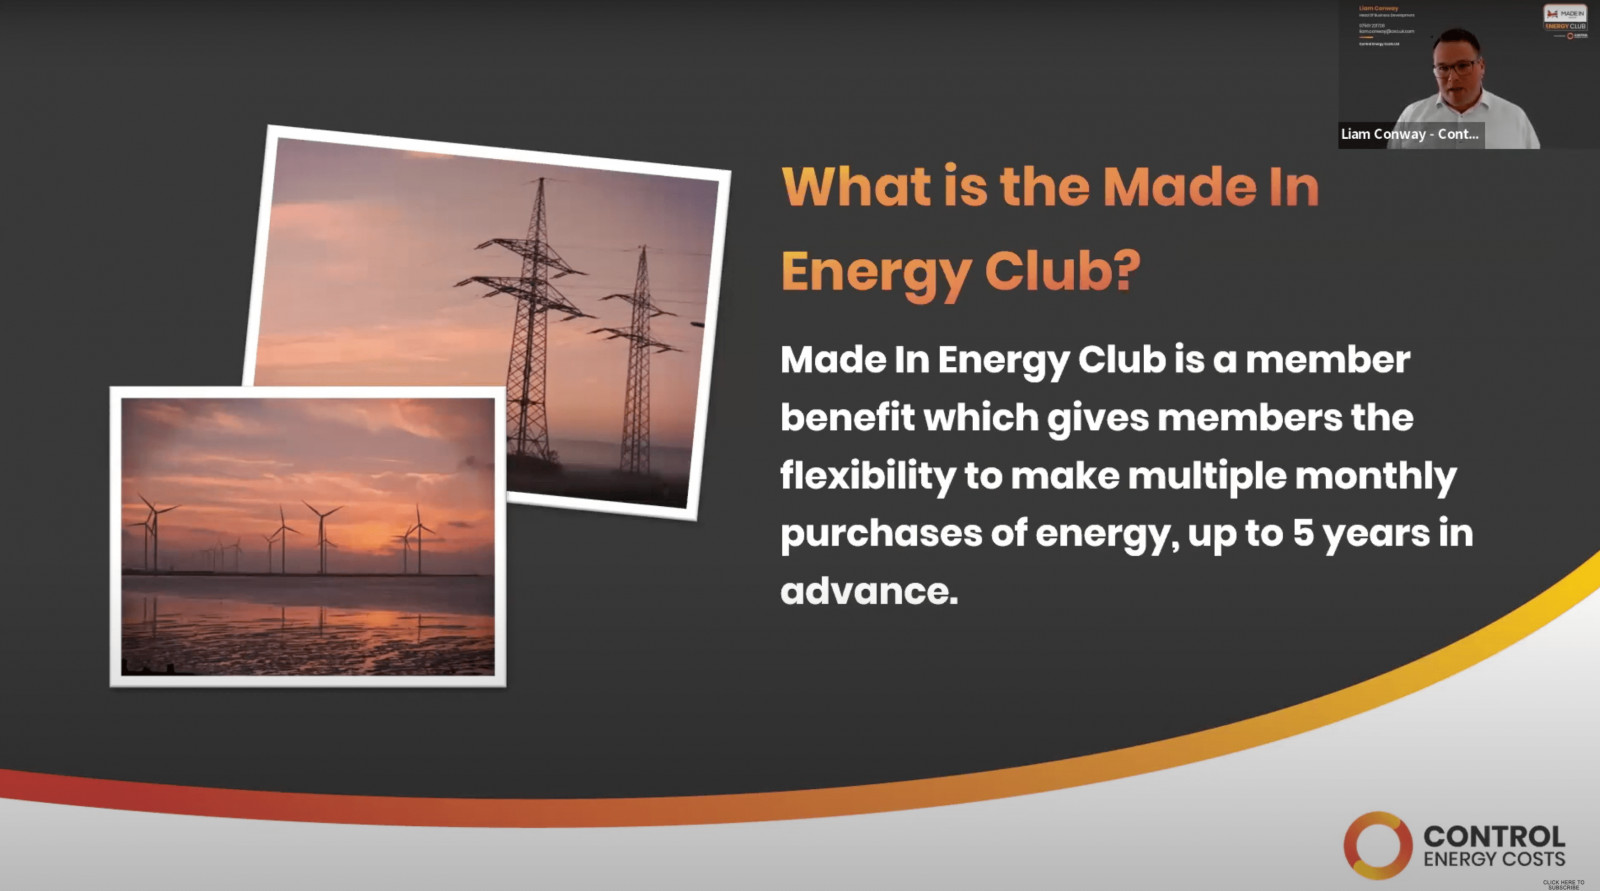 What is the Made in Energy Club?